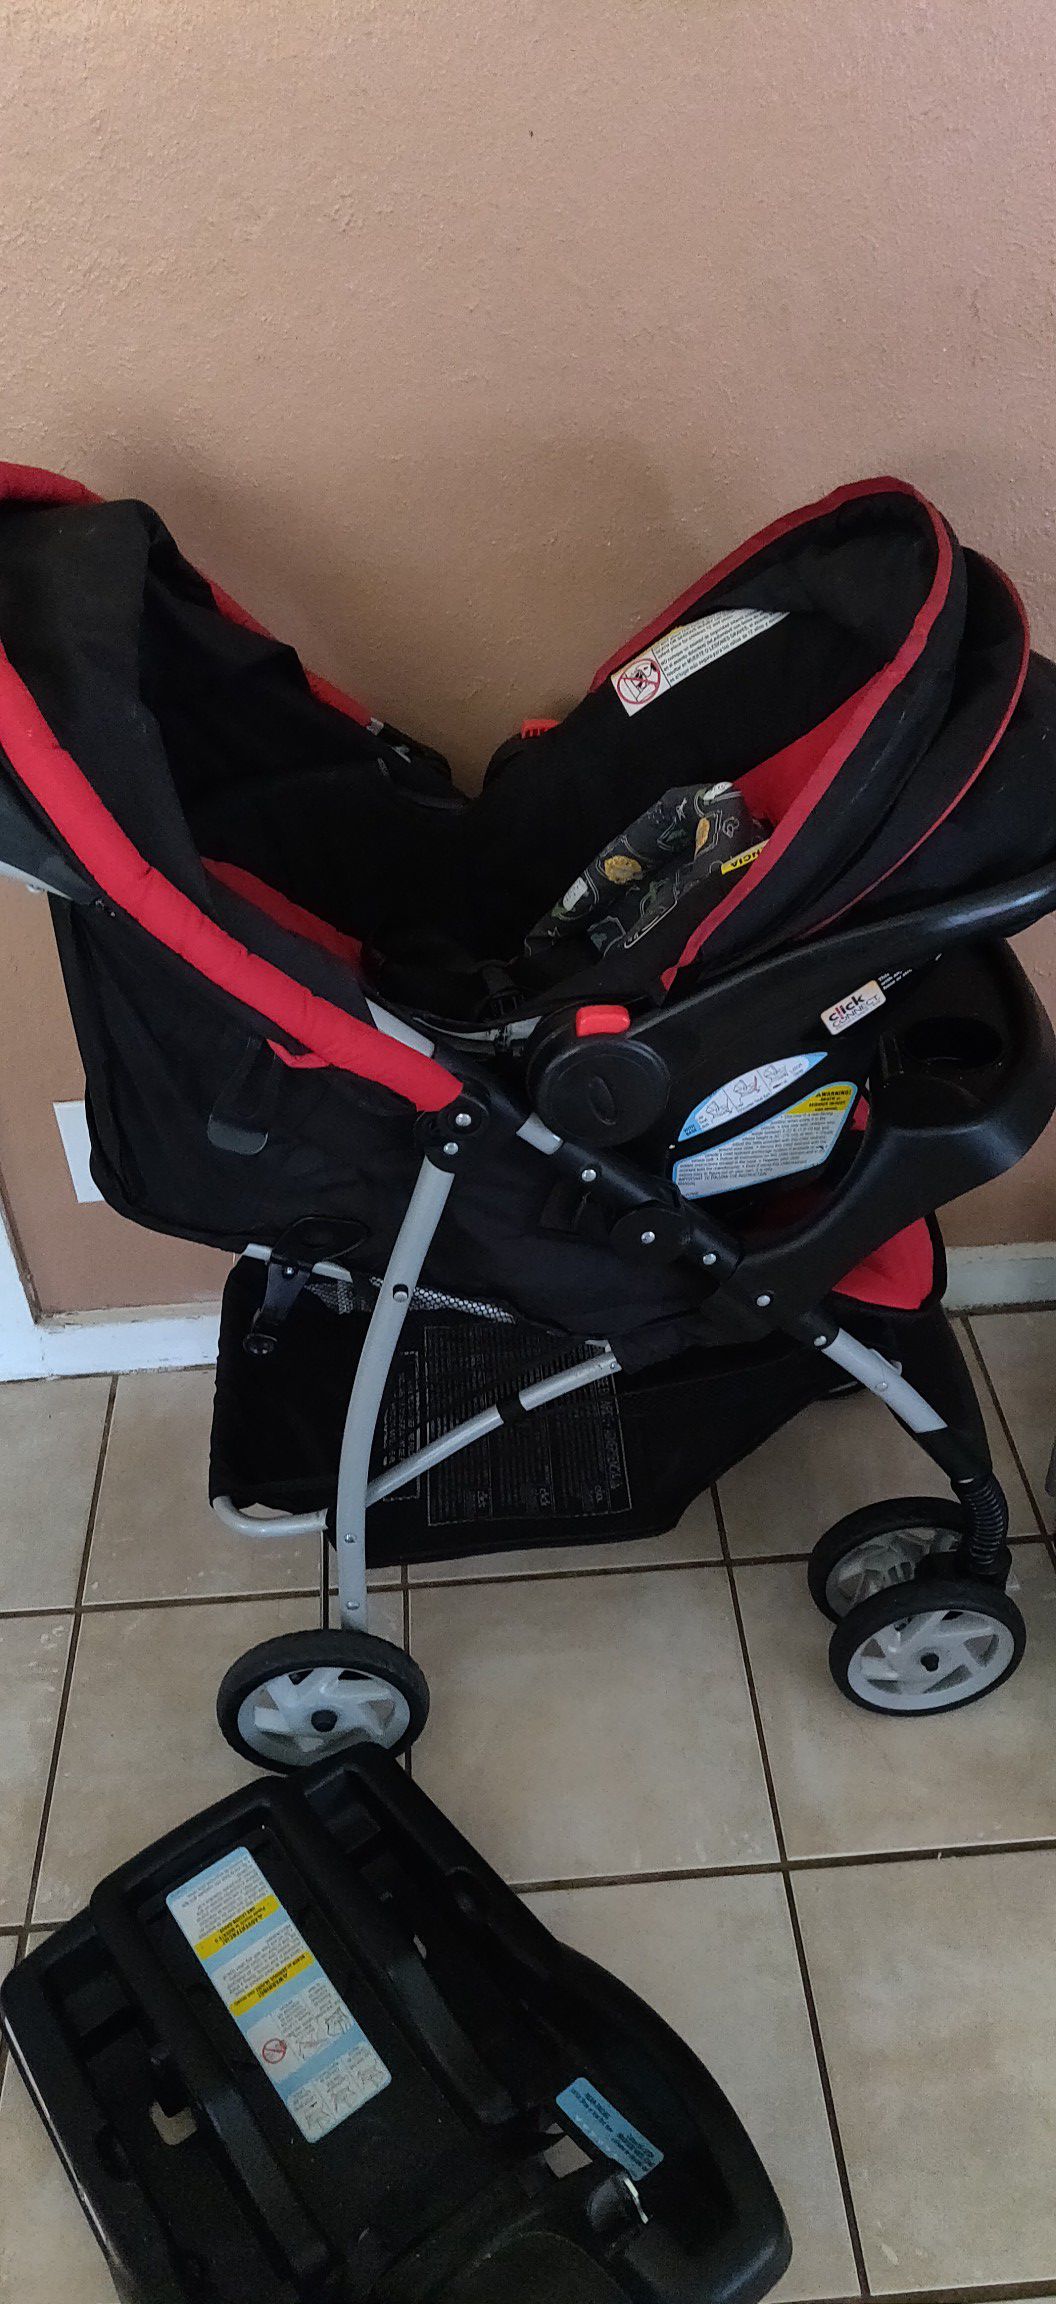 Graco 3 piece infant car seat and stroller